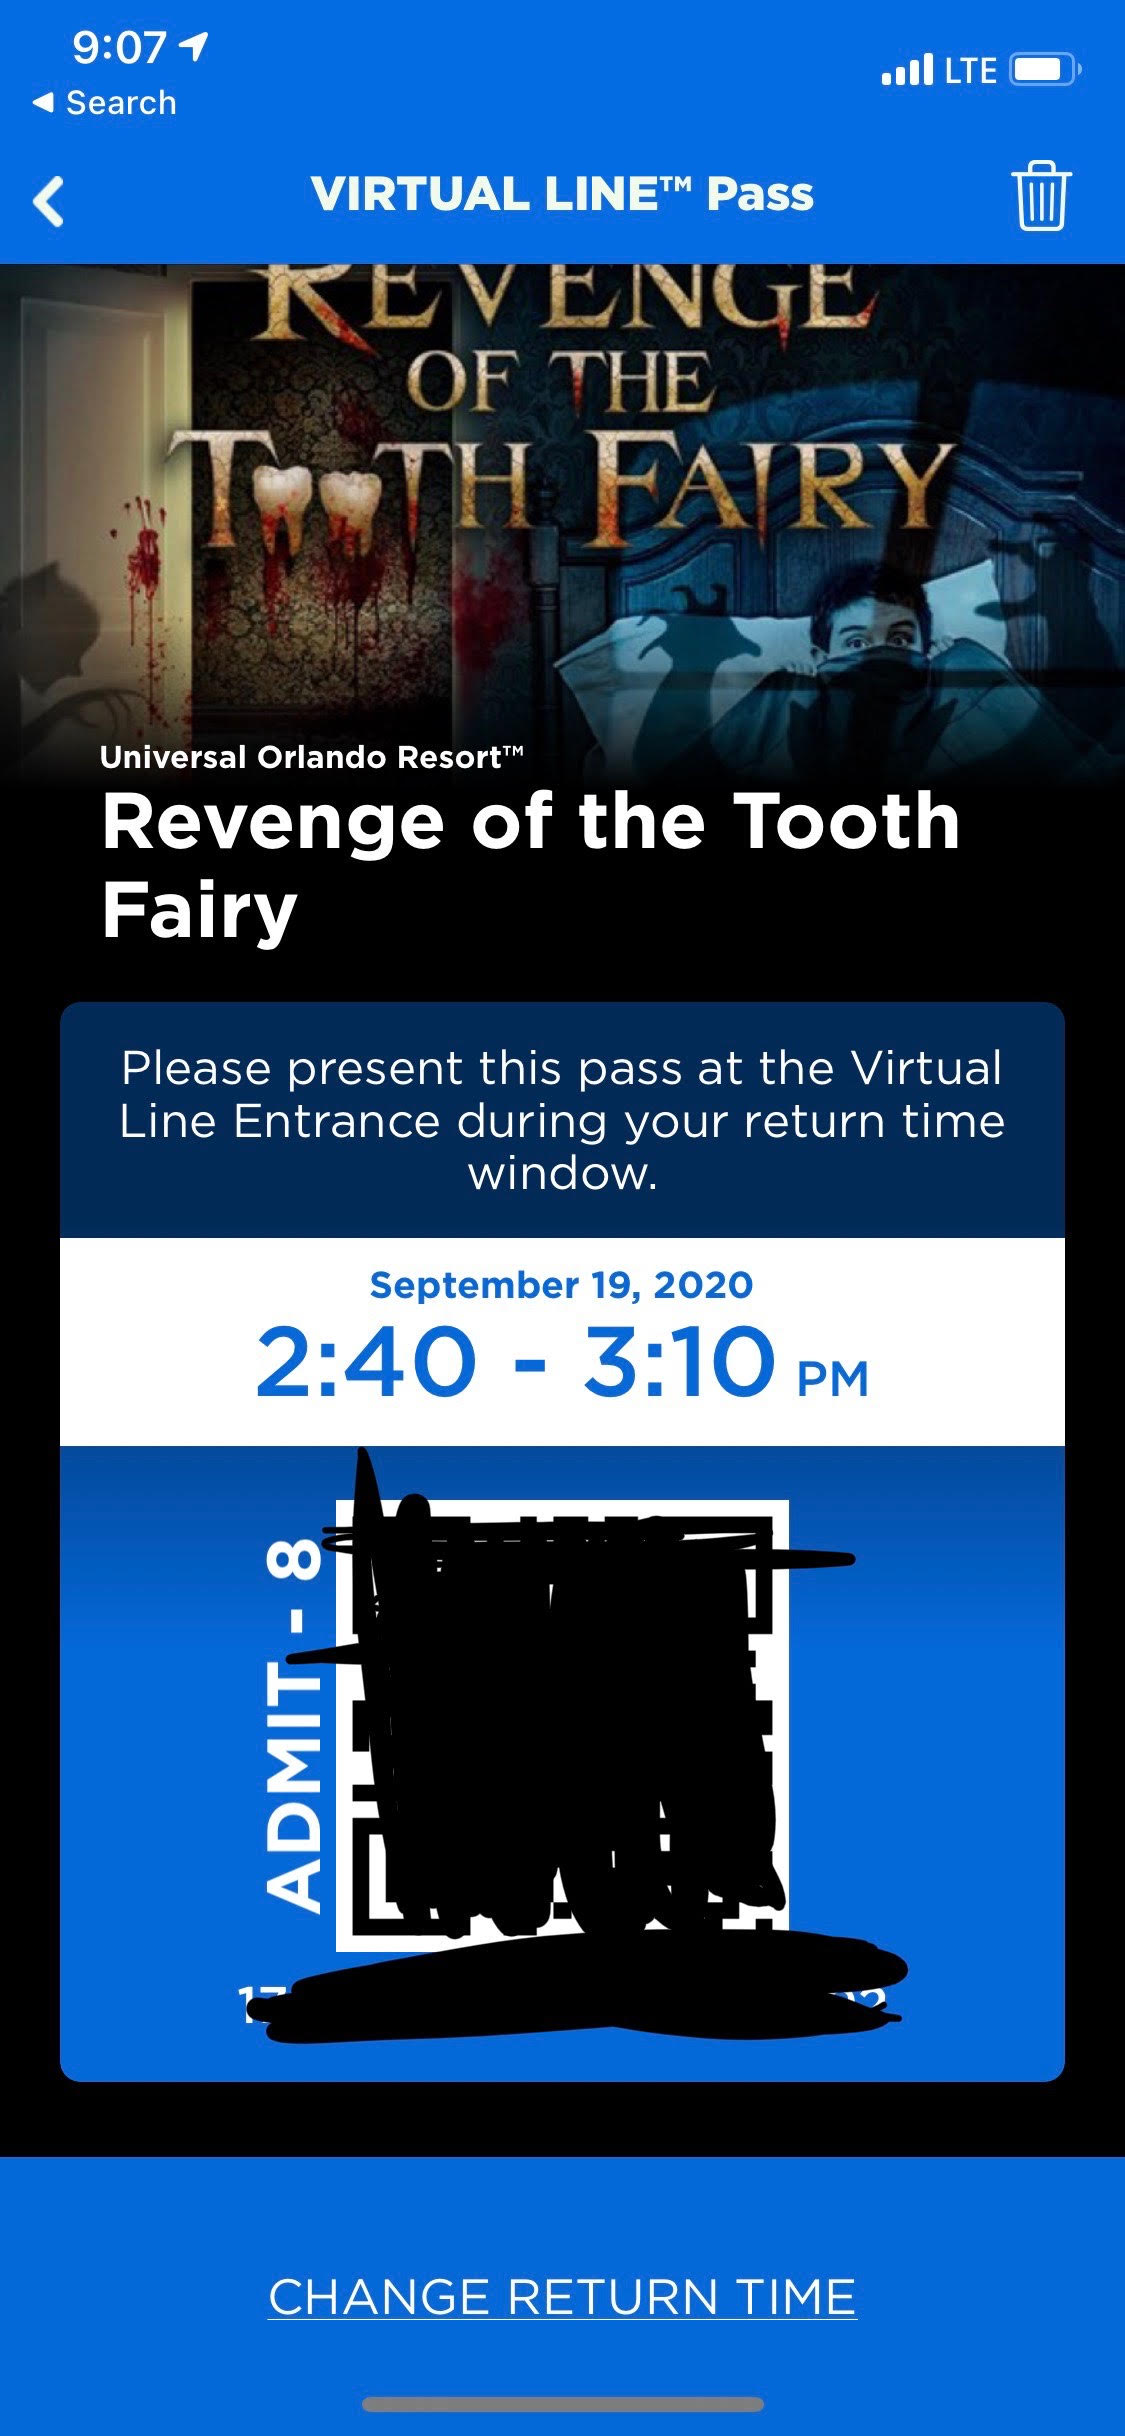 Revenge of the Tooth Fairy